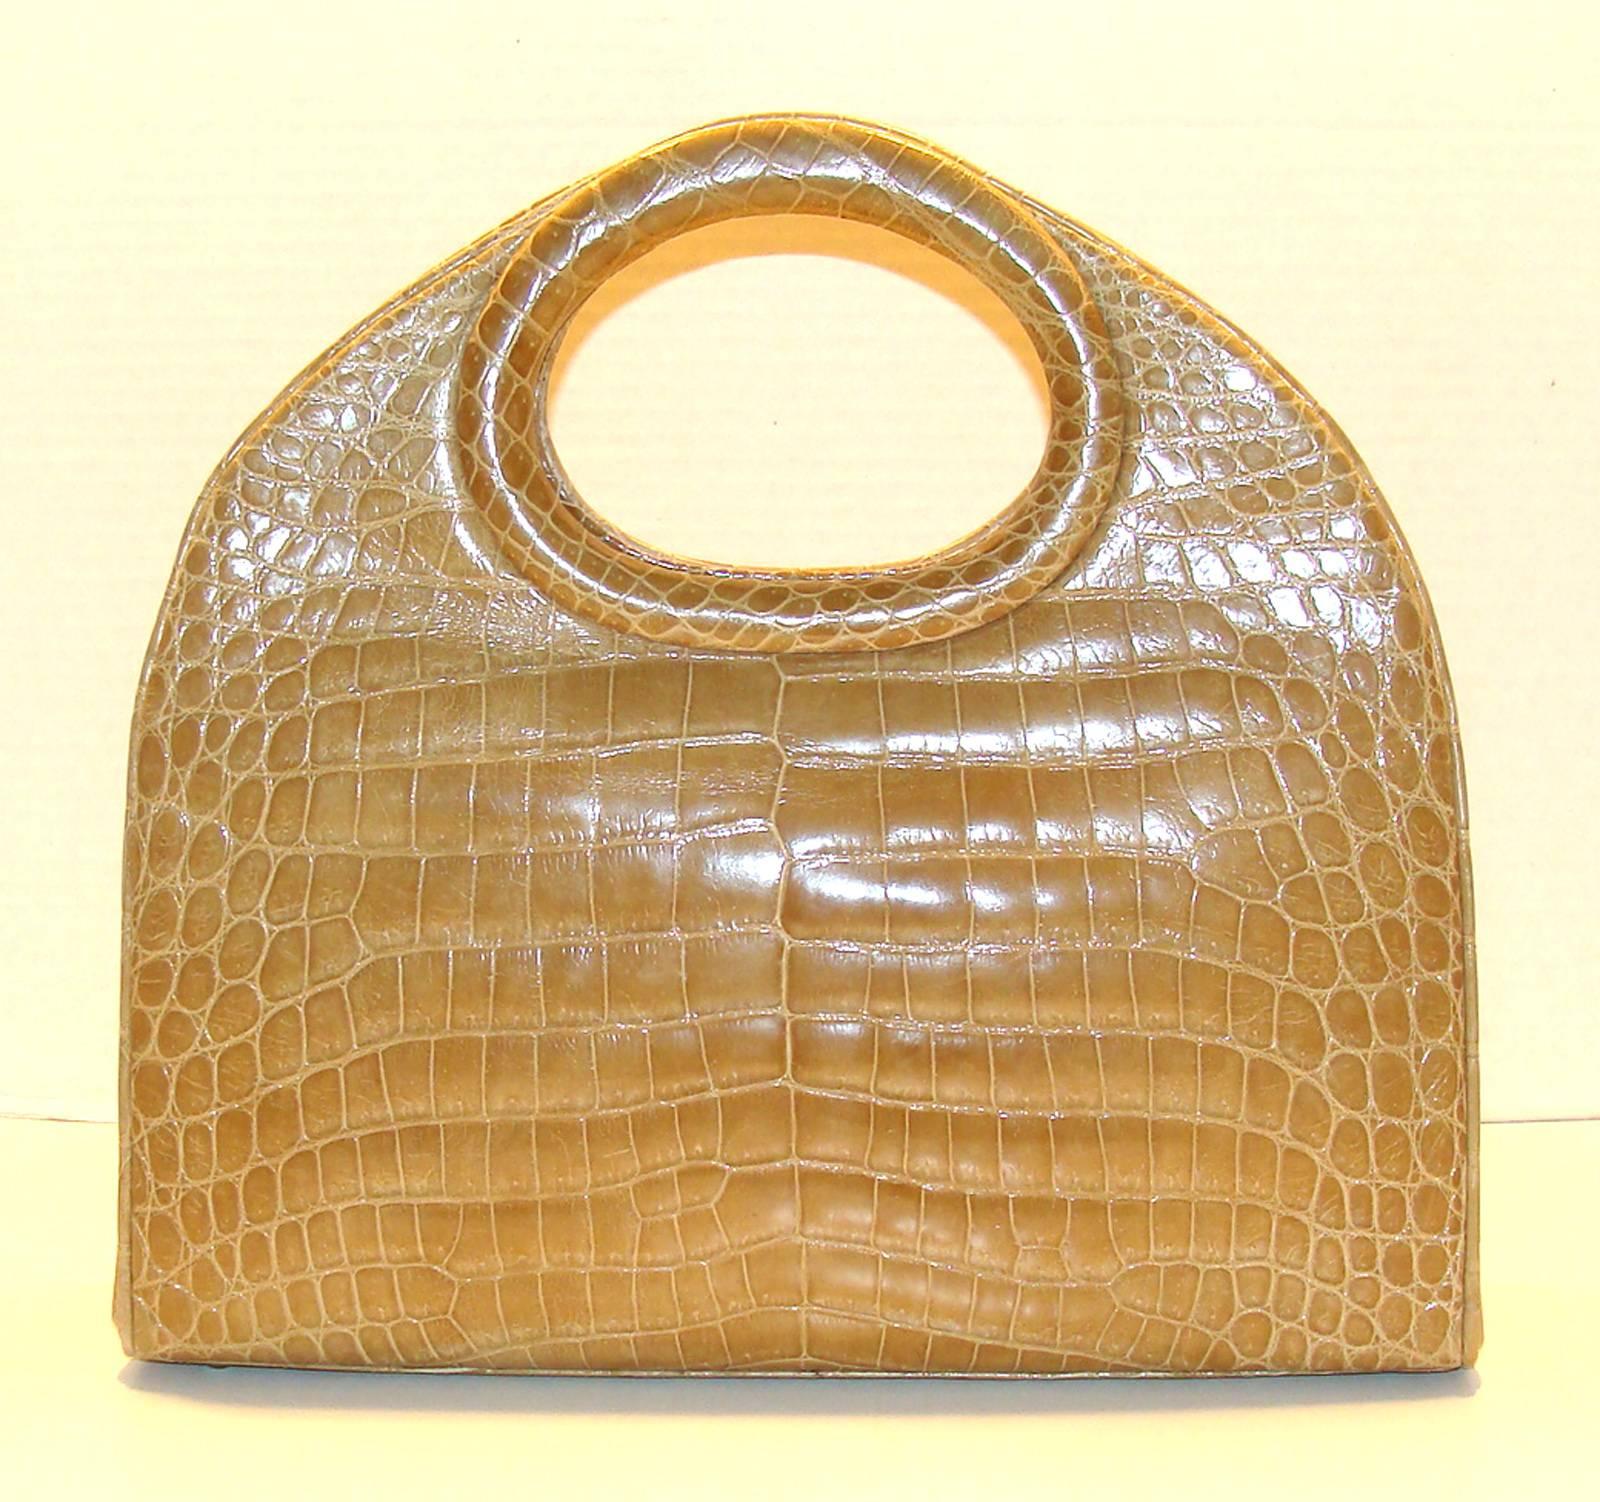 This huge center skin bag is exquisite and in fabulous condition and is wearable sculpture.  The blonde alligator is unusual and has a beautiful color.  It is great for year round and pairs with every color.

The bag is large enough to slide an iPad